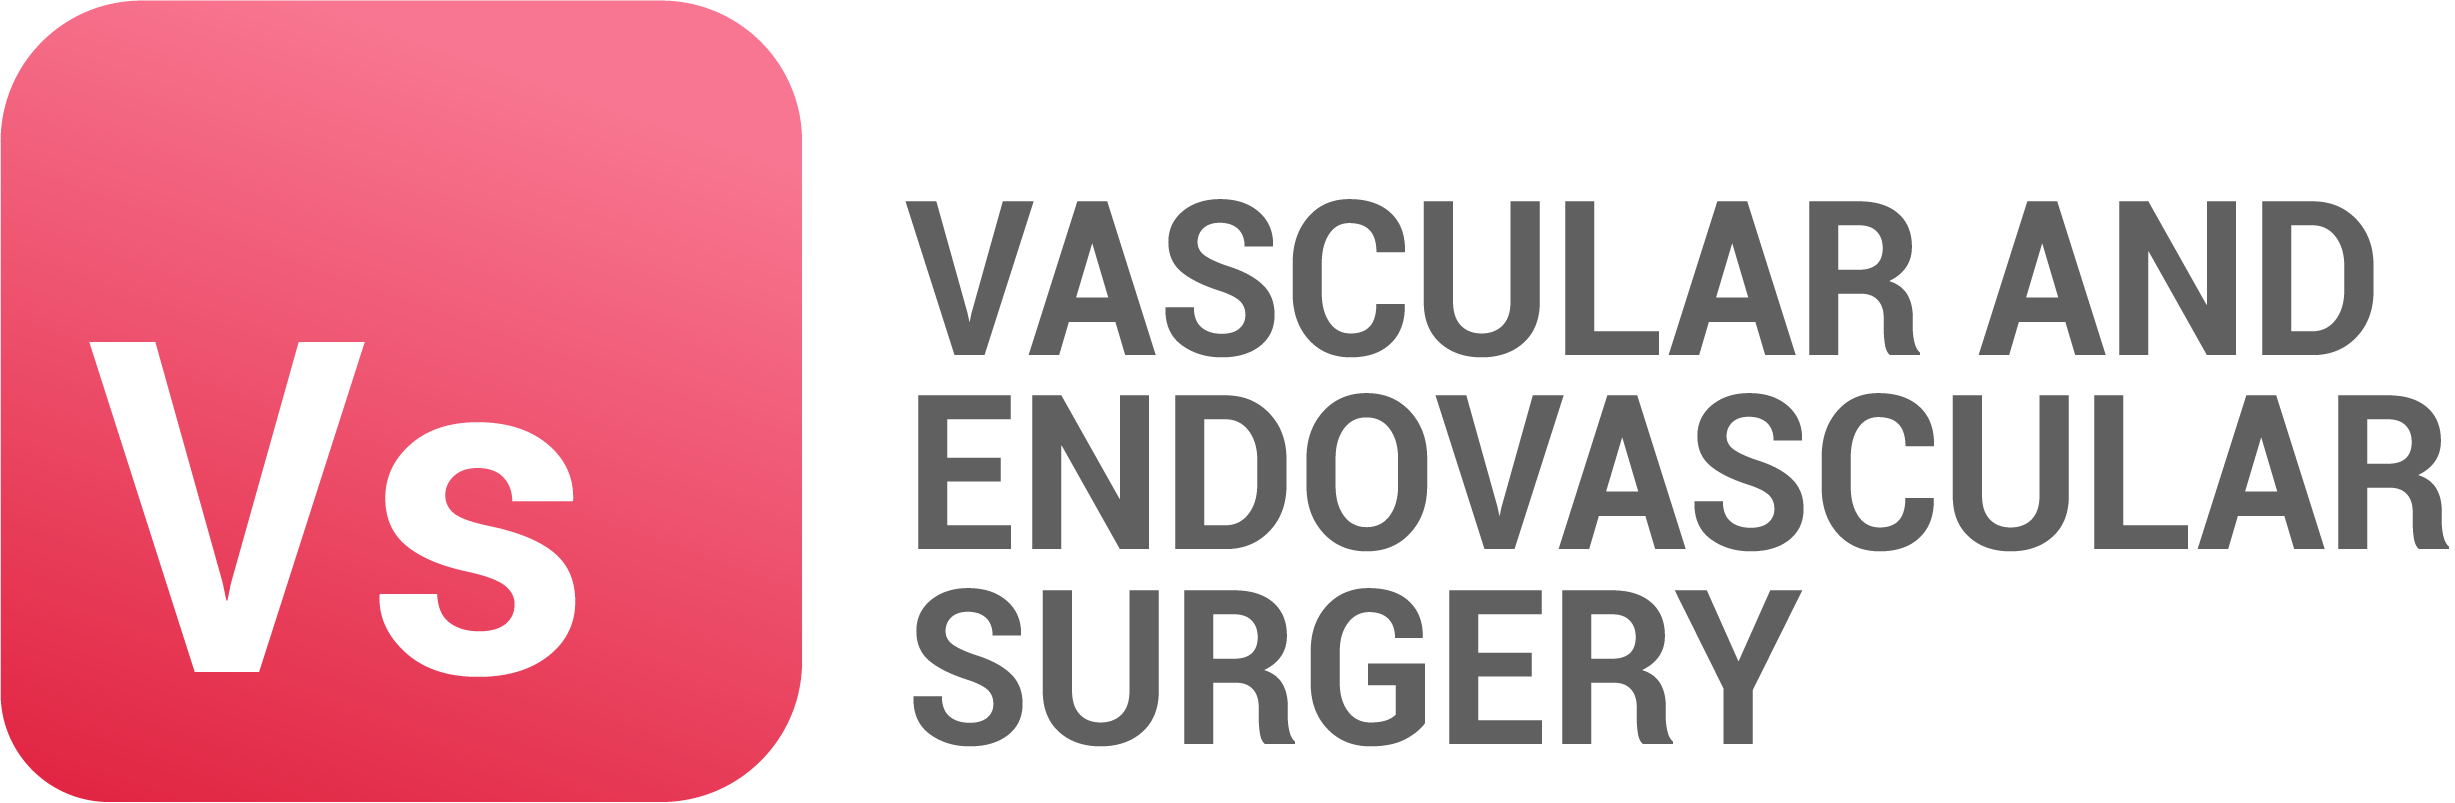 Vascular and Endovascular Surgery Image